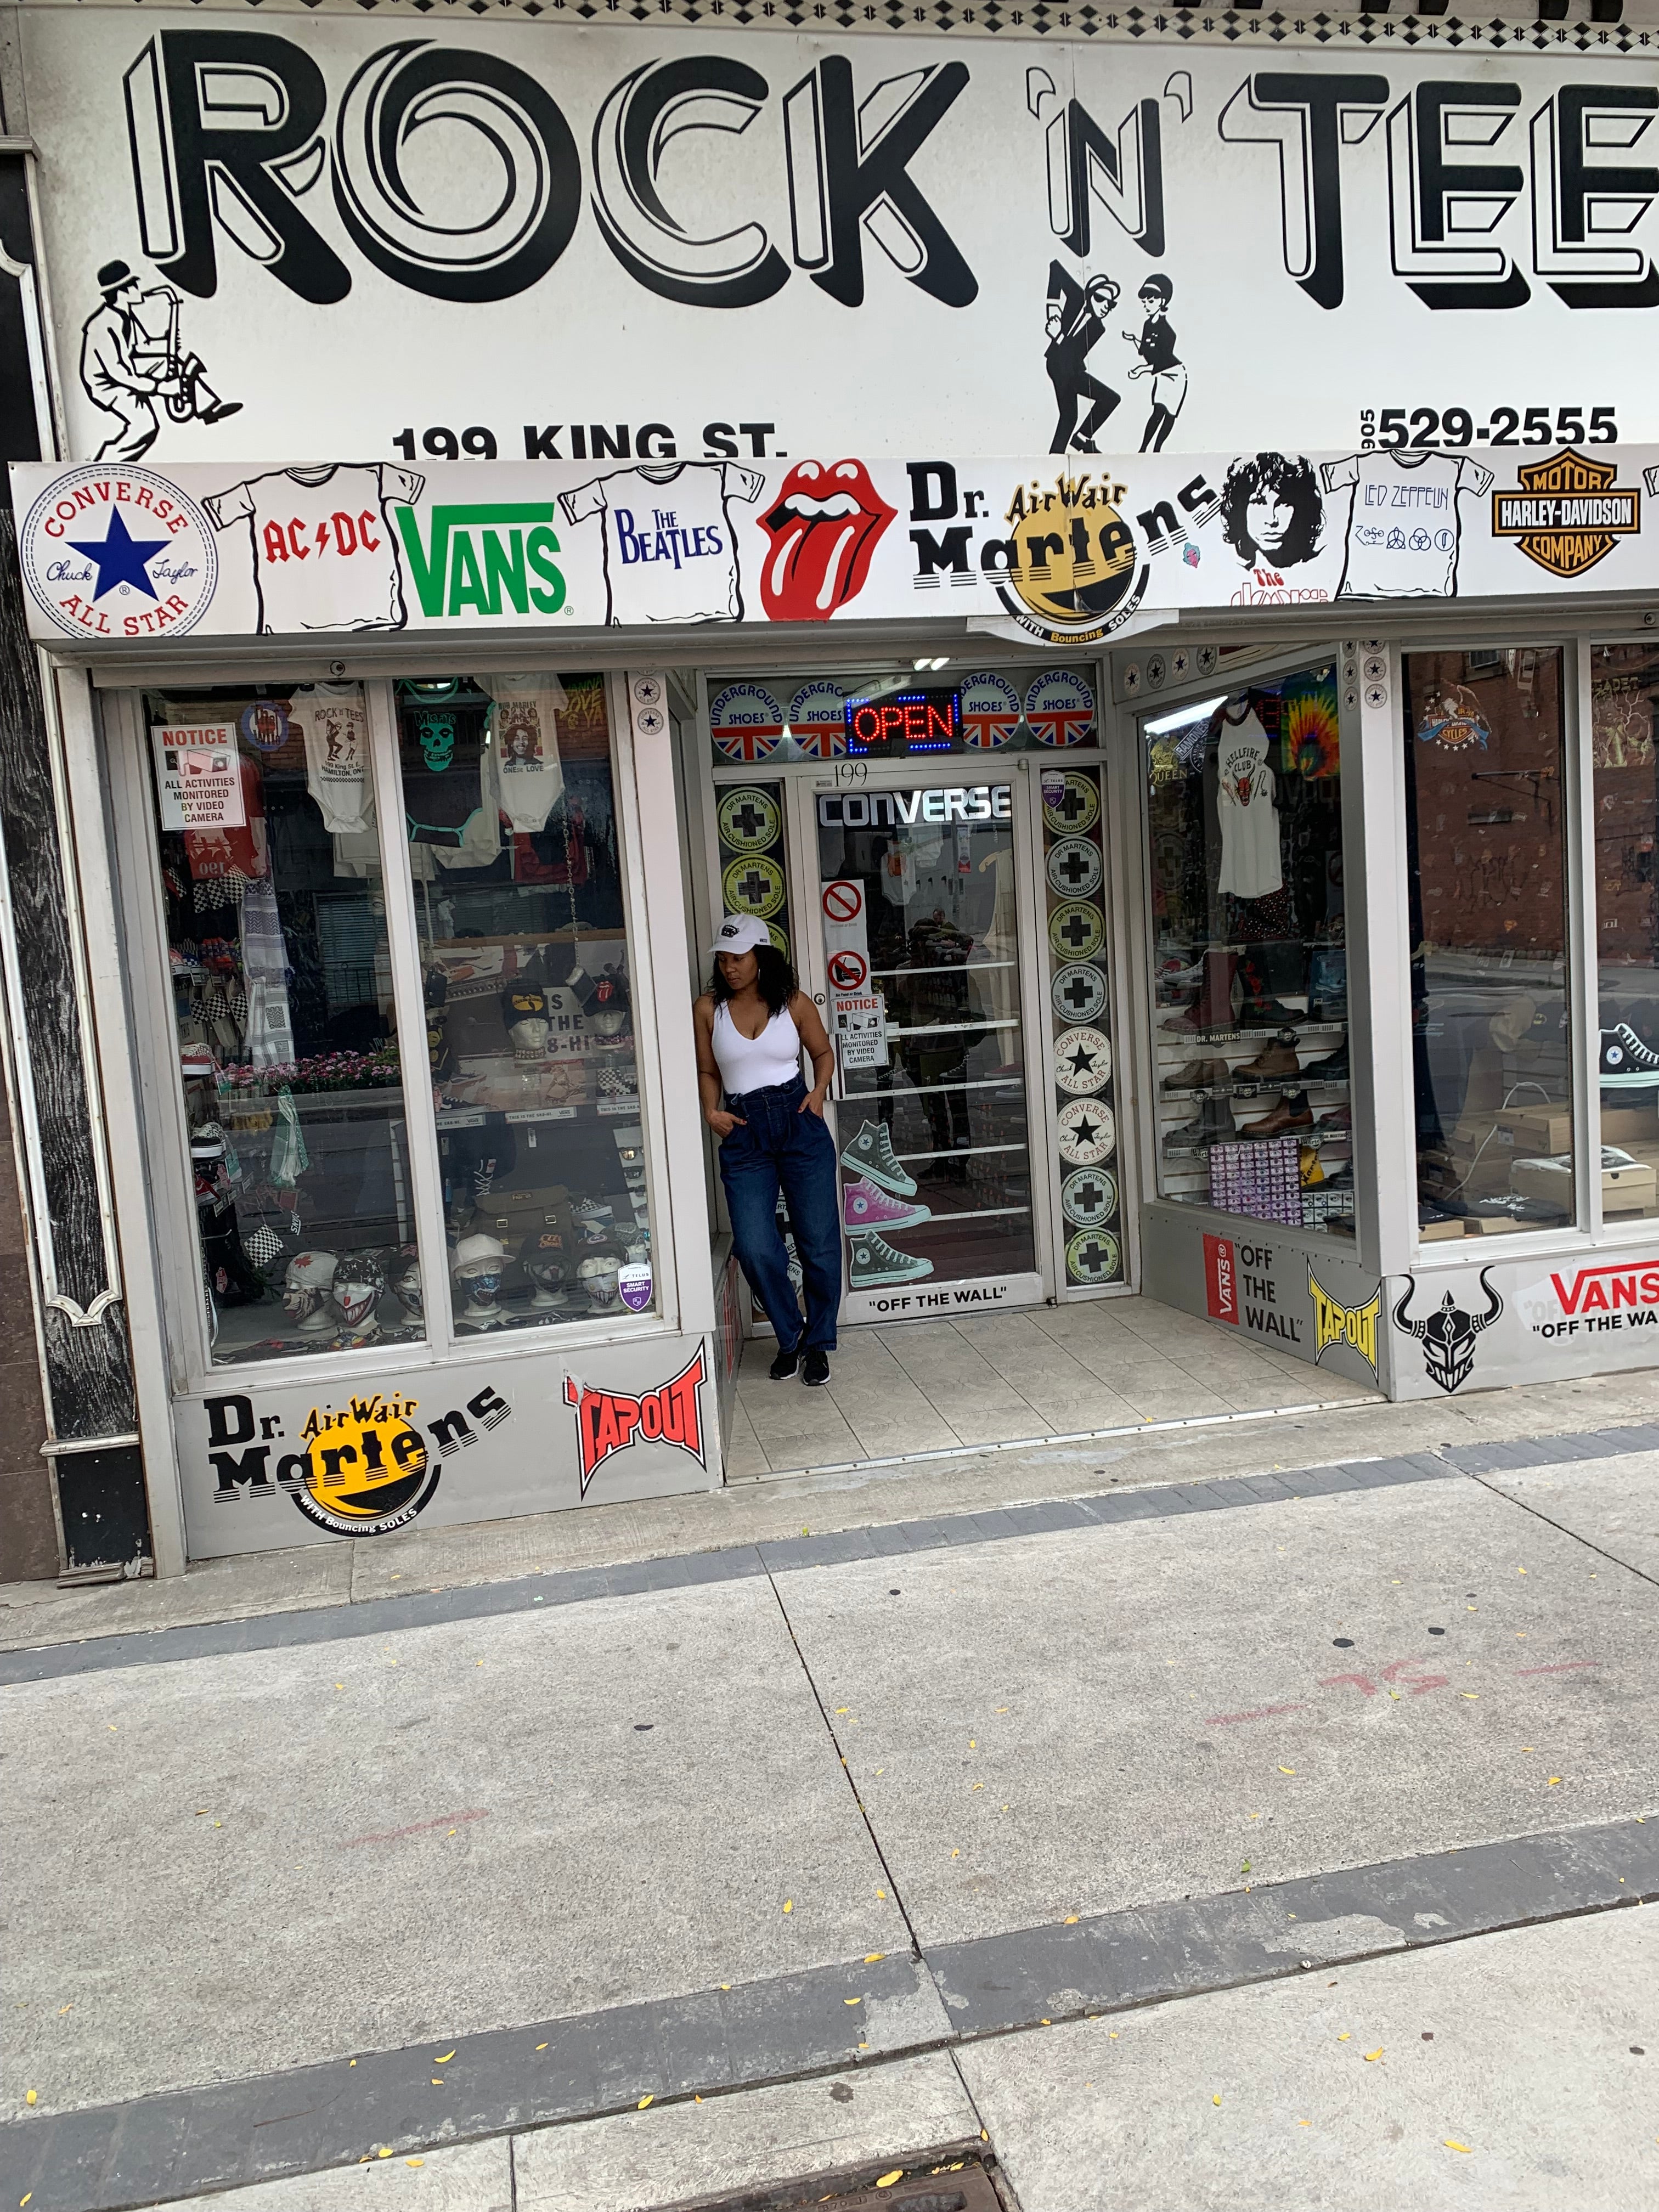 A young black female in a white RUBBERBAND SOVEREIGN GOLF CAP, leans against a store front of the iconic 'ROCK N' TEE' store, in downtown Hamilton on 199 King St., featuring a display of iconic brand logos such as Vans, The Beatles, AC/DC, and Dr. Martens. The storefront showcases a variety of merchandise visible through the glass windows